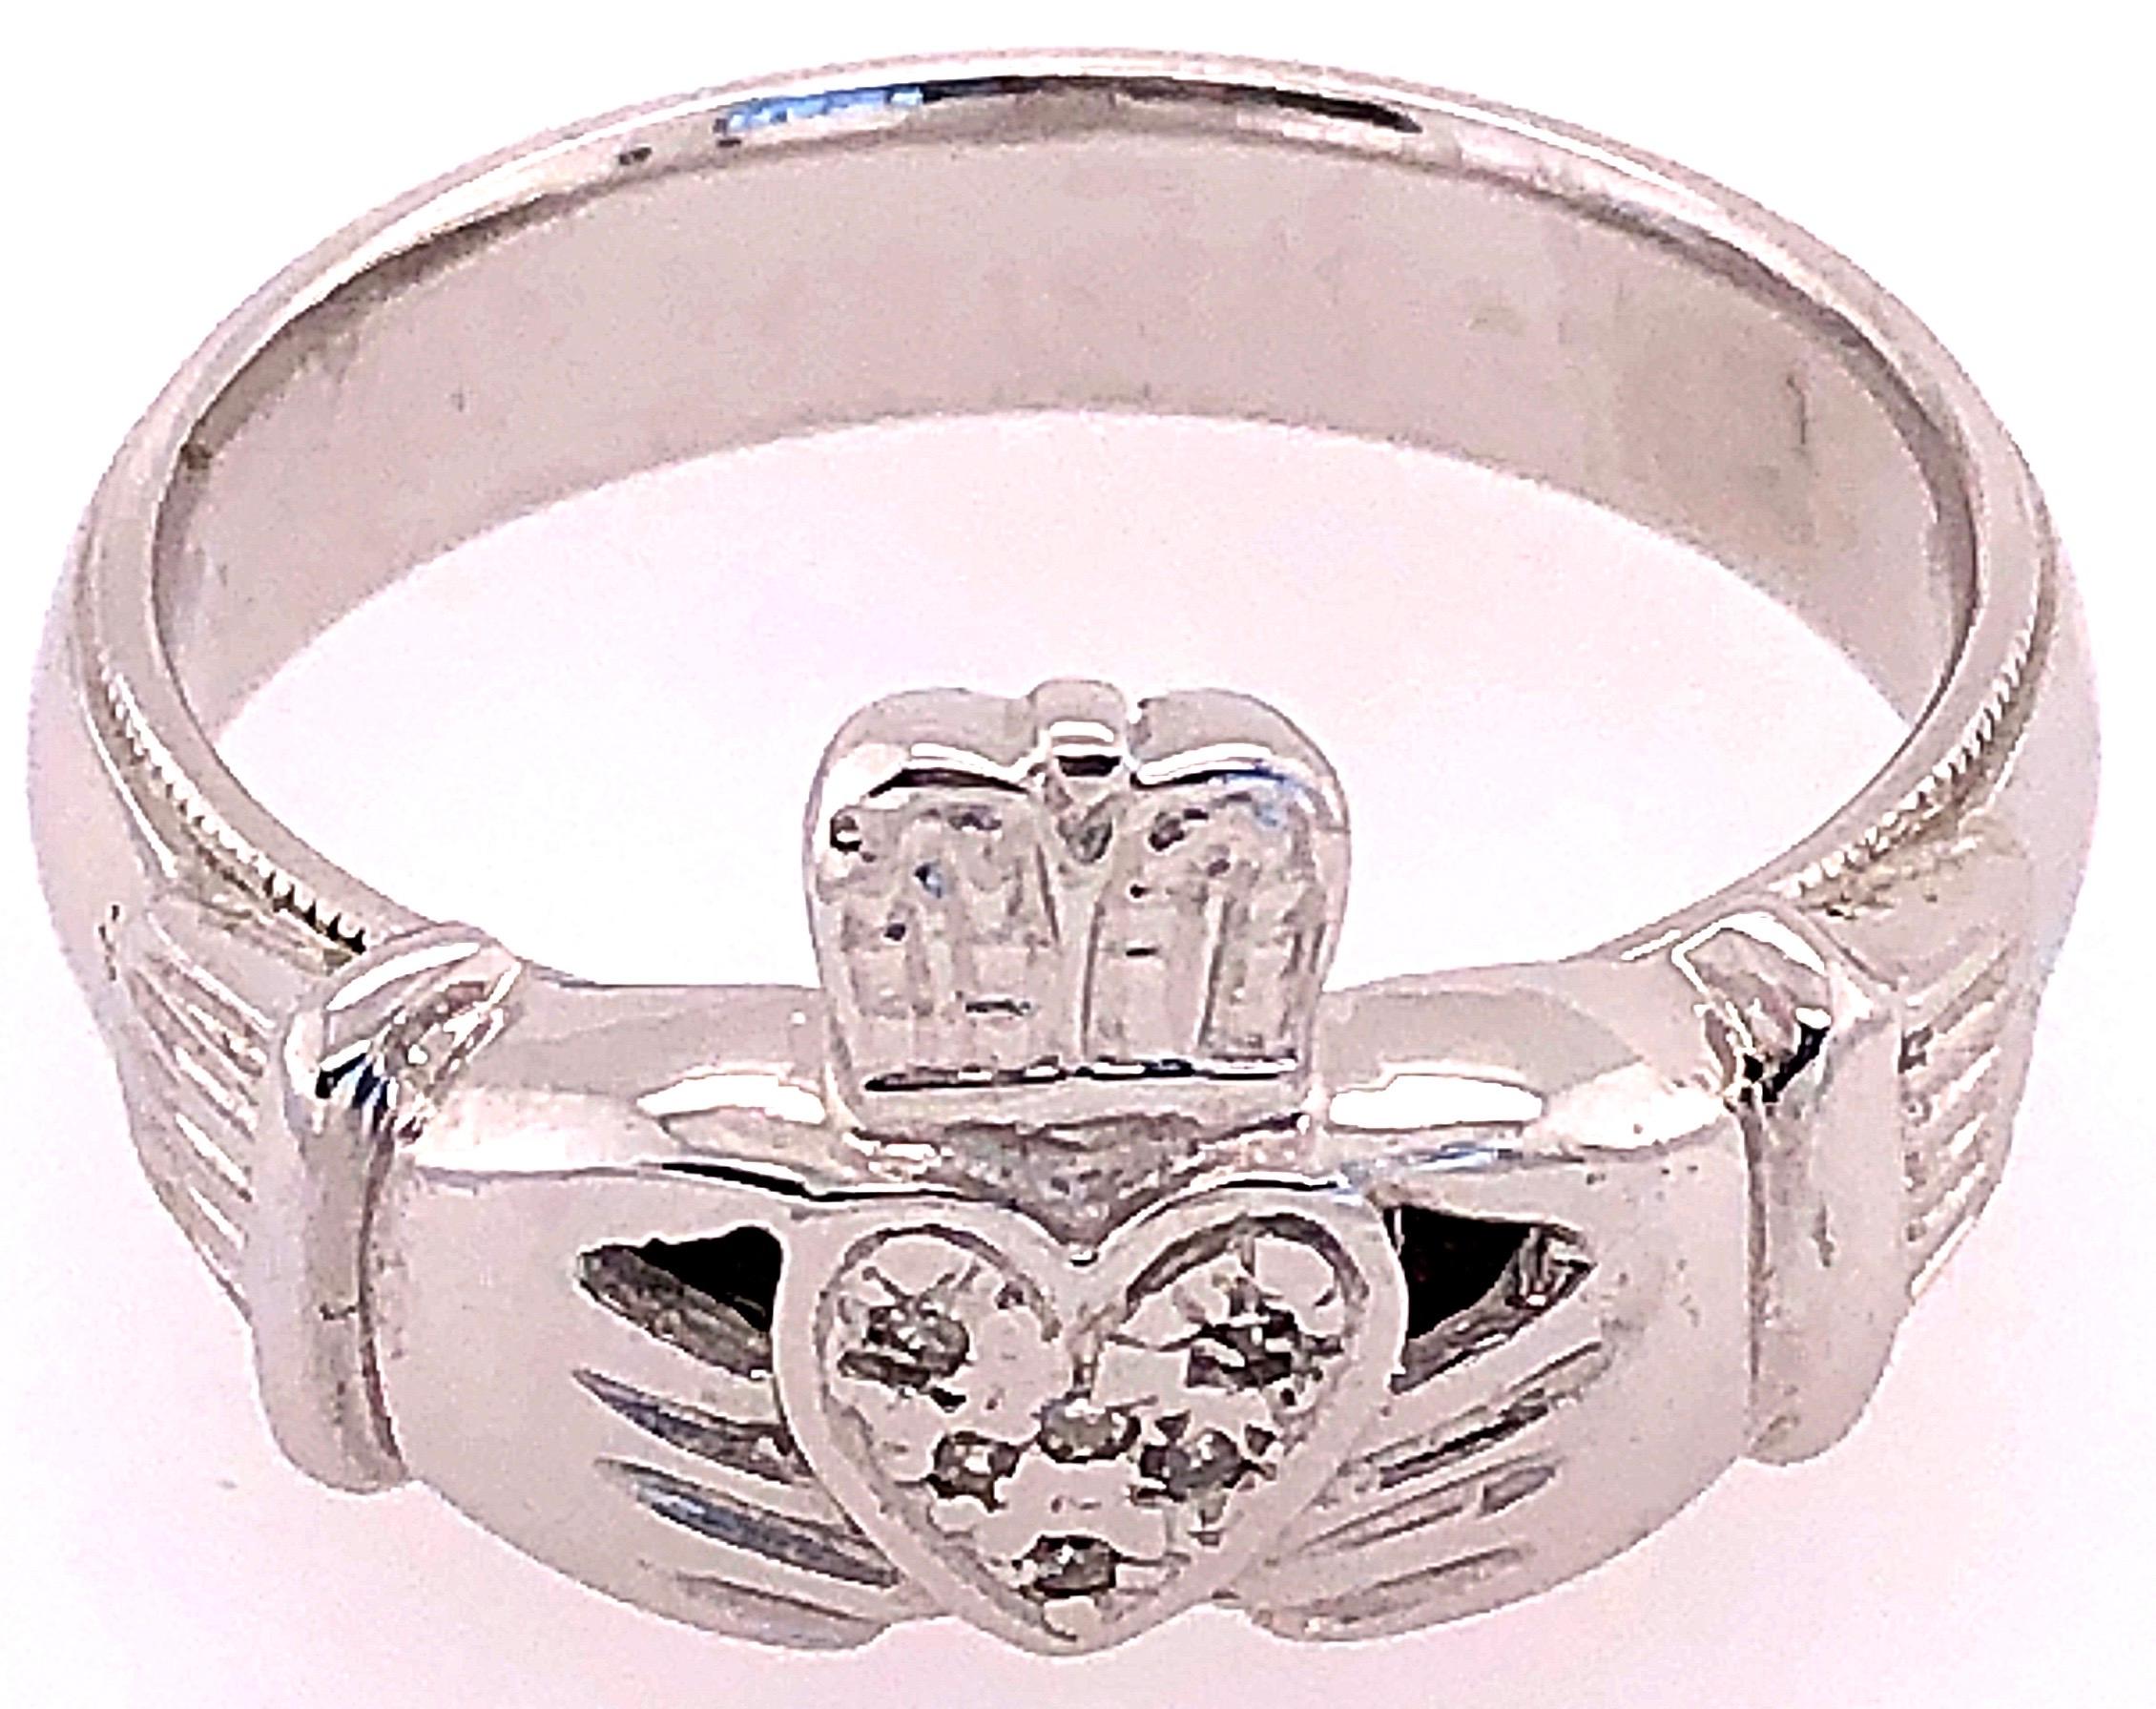 14 Karat White Gold Claddagh Ring with Round Diamonds.
Claddagh ring is a traditional Irish ring which represent love, loyalty, and friendship (the hand represent the friendship, the heart represents love and the crown represent loyalty).
The ring,